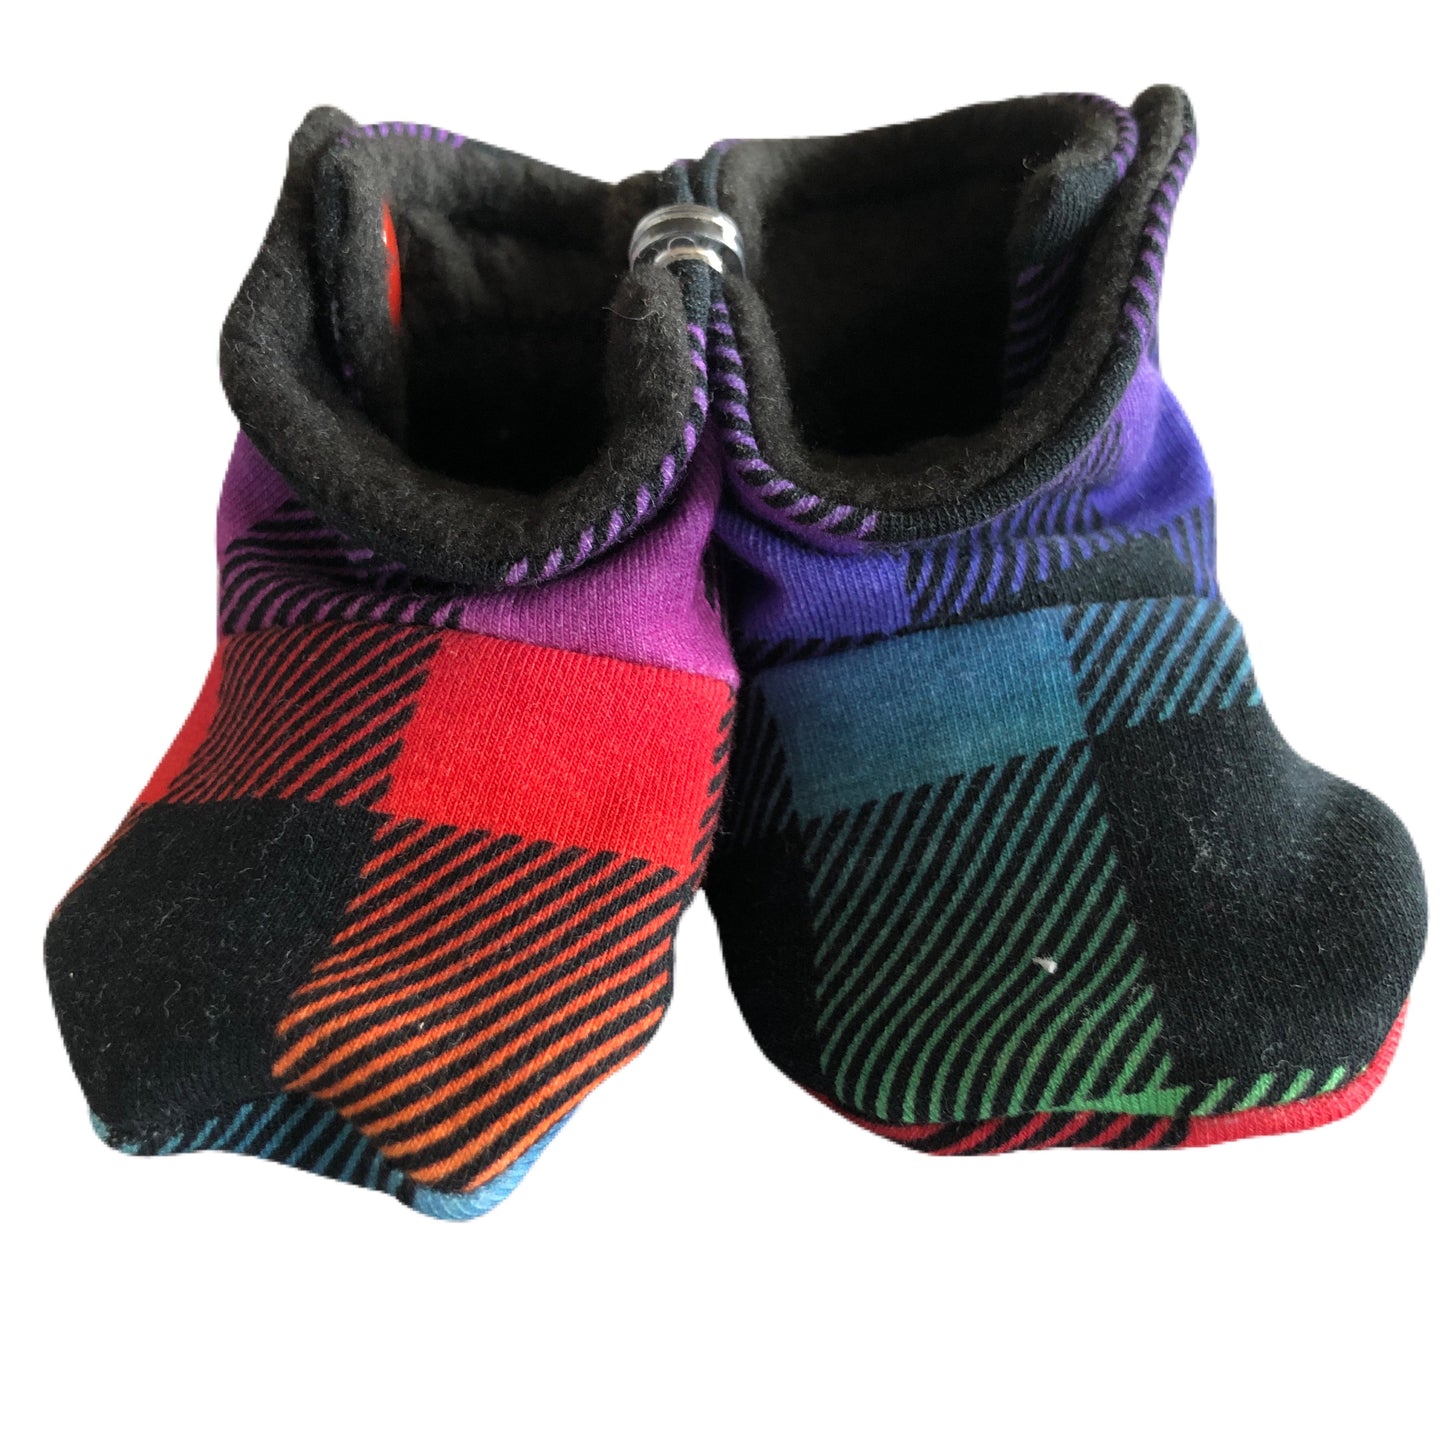 Stay on Booties - Newborn Size